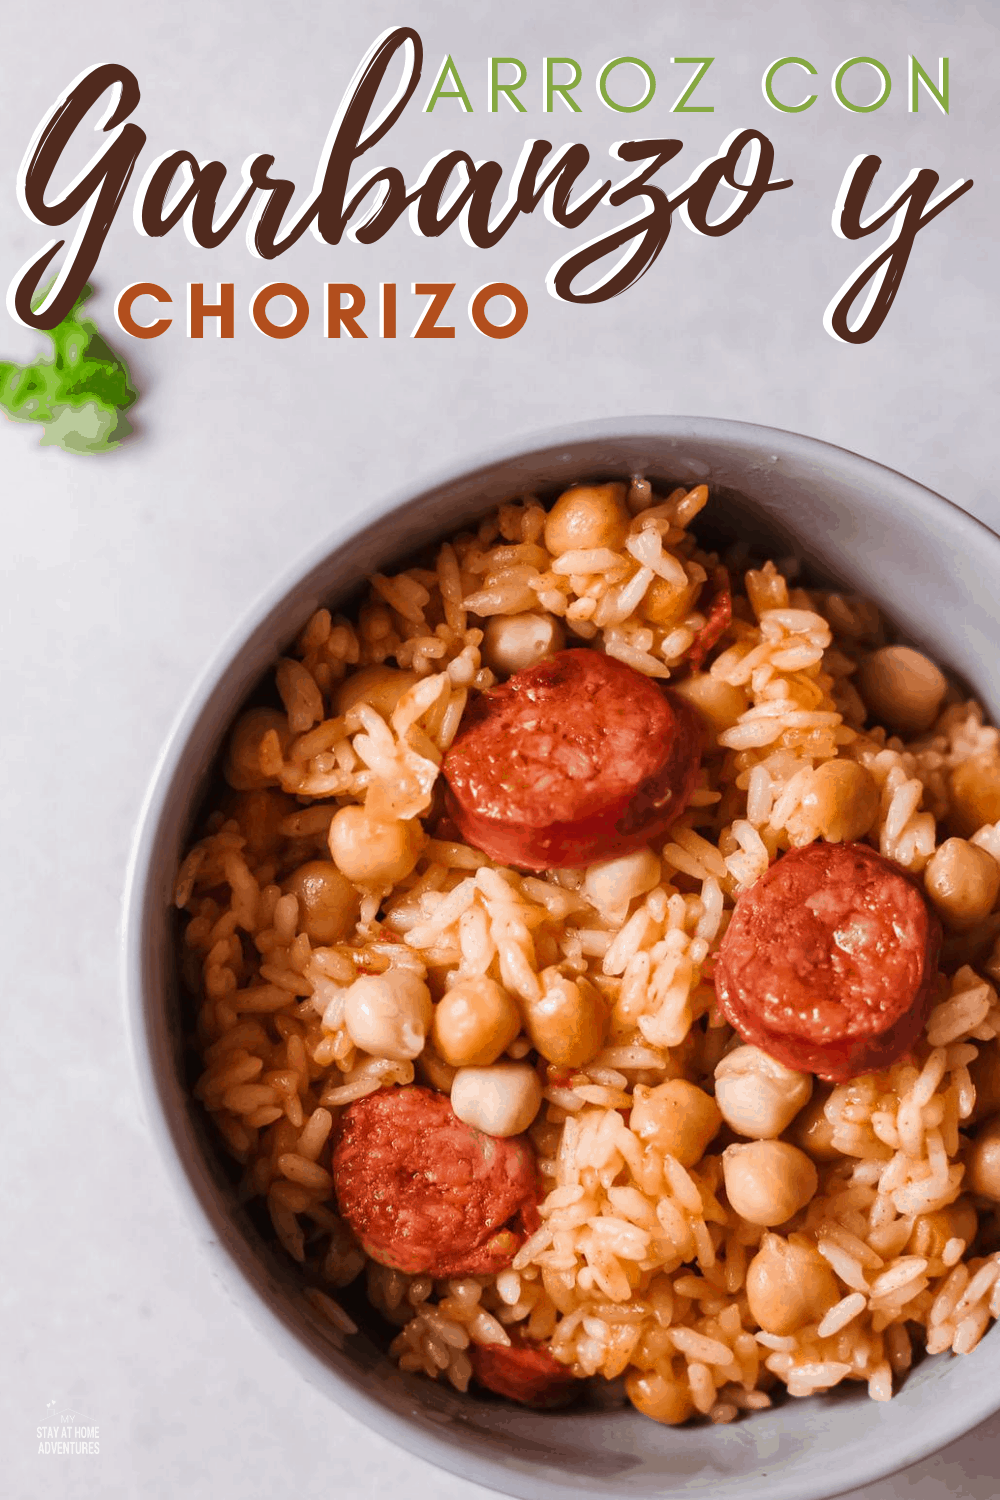 Arroz con chorizo y garbanzo (rice and garbanzo beans) is a flavorful combination of rice, sausage, and garbanzo beans. This easy dish is an inexpensive and delicious meal. via @mystayathome